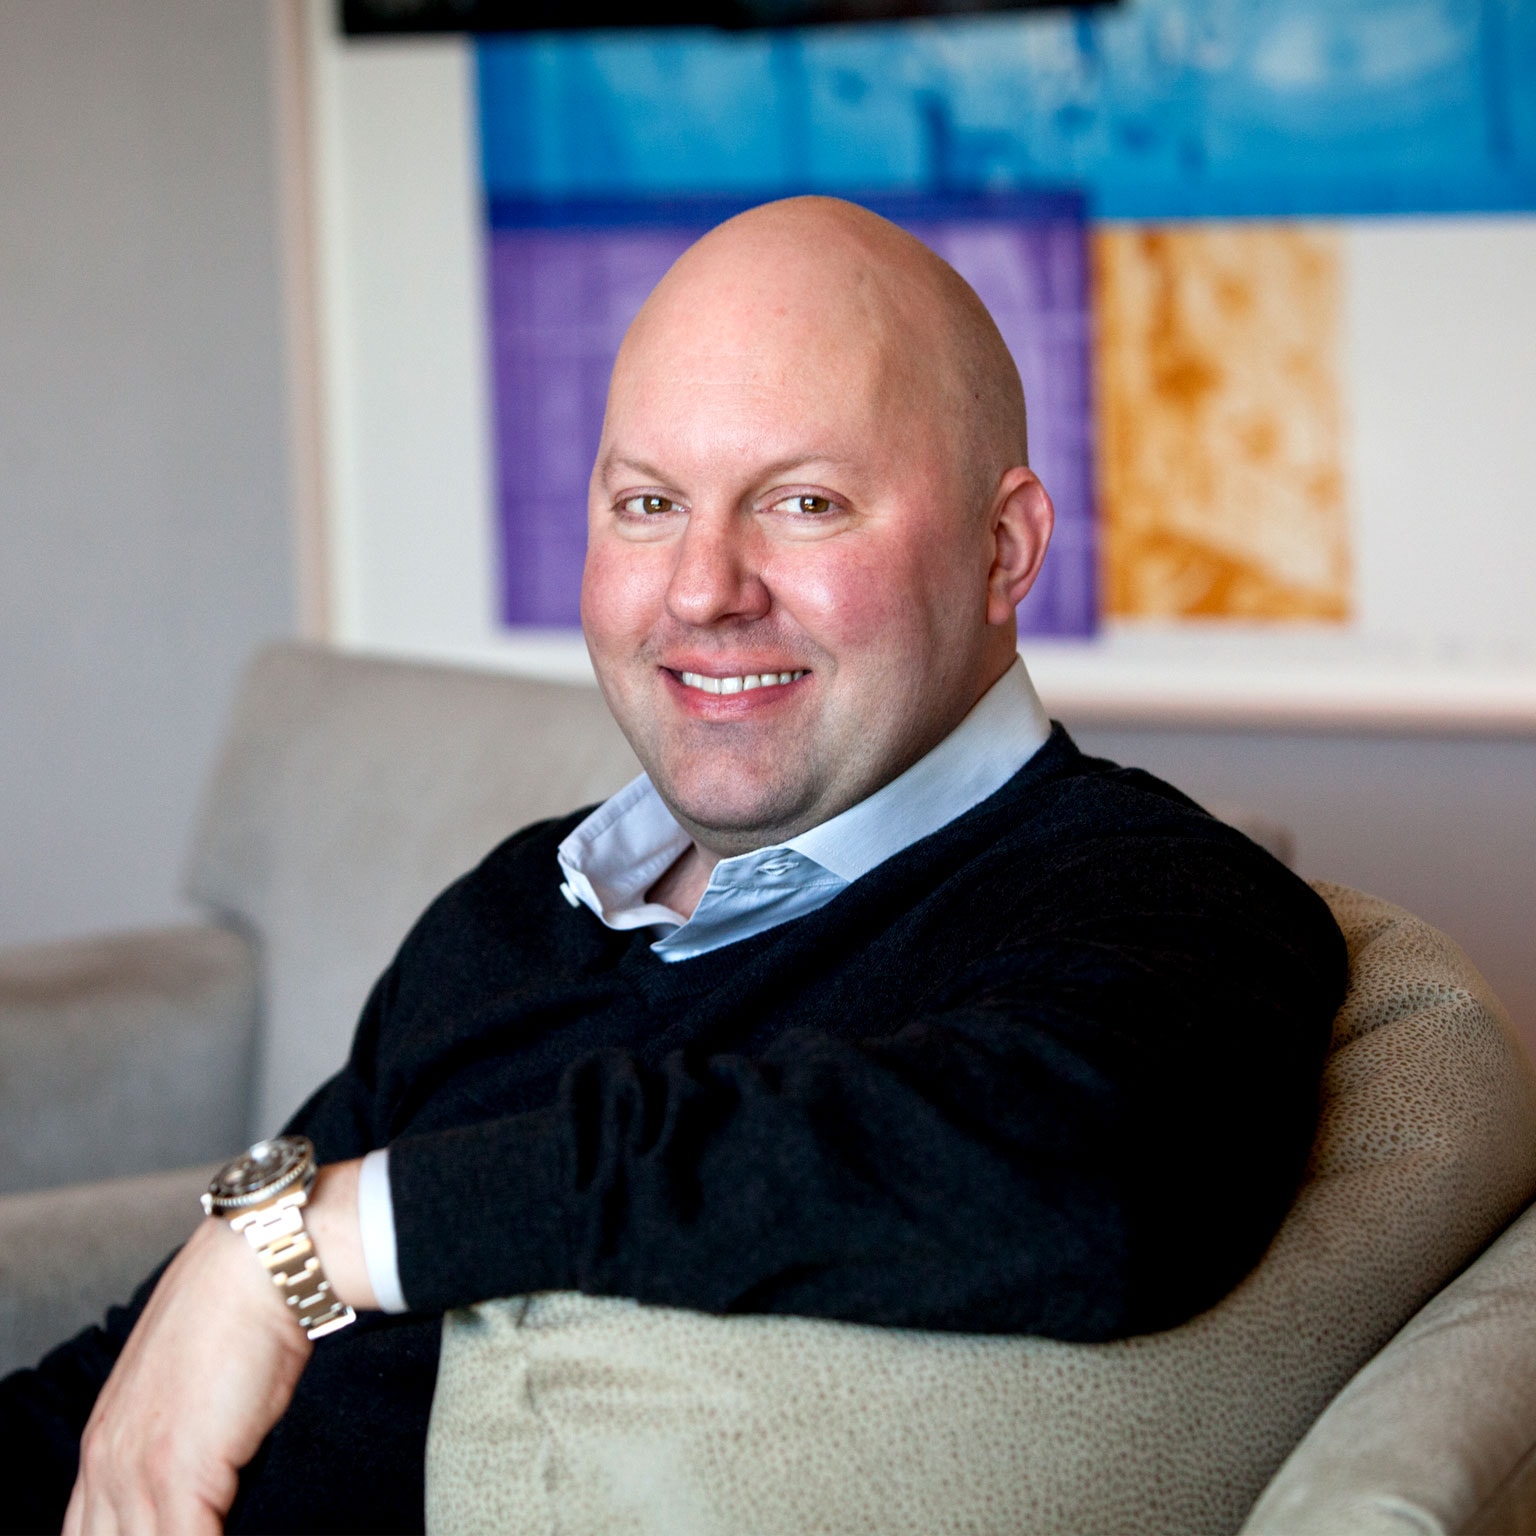 Marc Andreessen arrived in Silicon Valley 28 years ago, fresh from the University of Illinois, where he and a colleague developed NCSA Mosaic, the gra